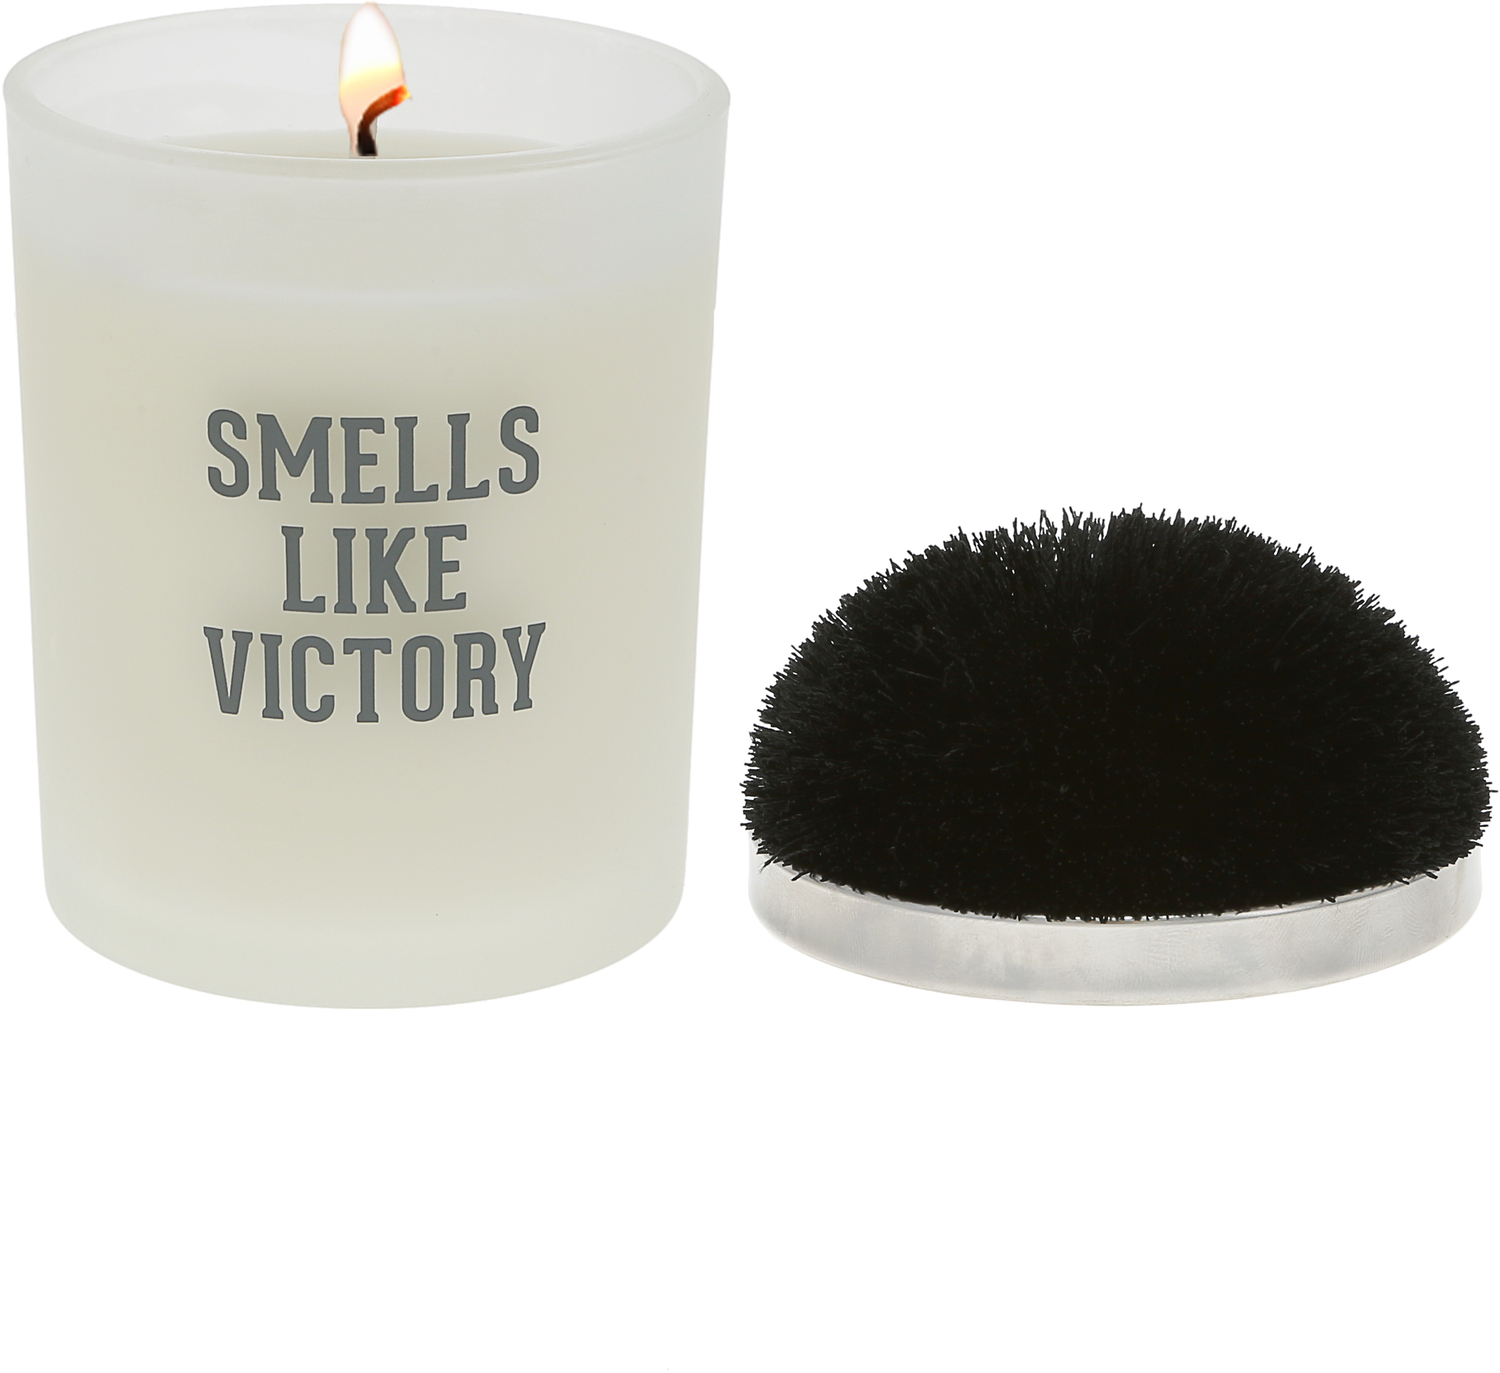 Victory - Black by Repre-Scent - Victory - Black - 5.5 oz - 100% Soy Wax Candle with Pom Pom Lid
Scent: Tranquility